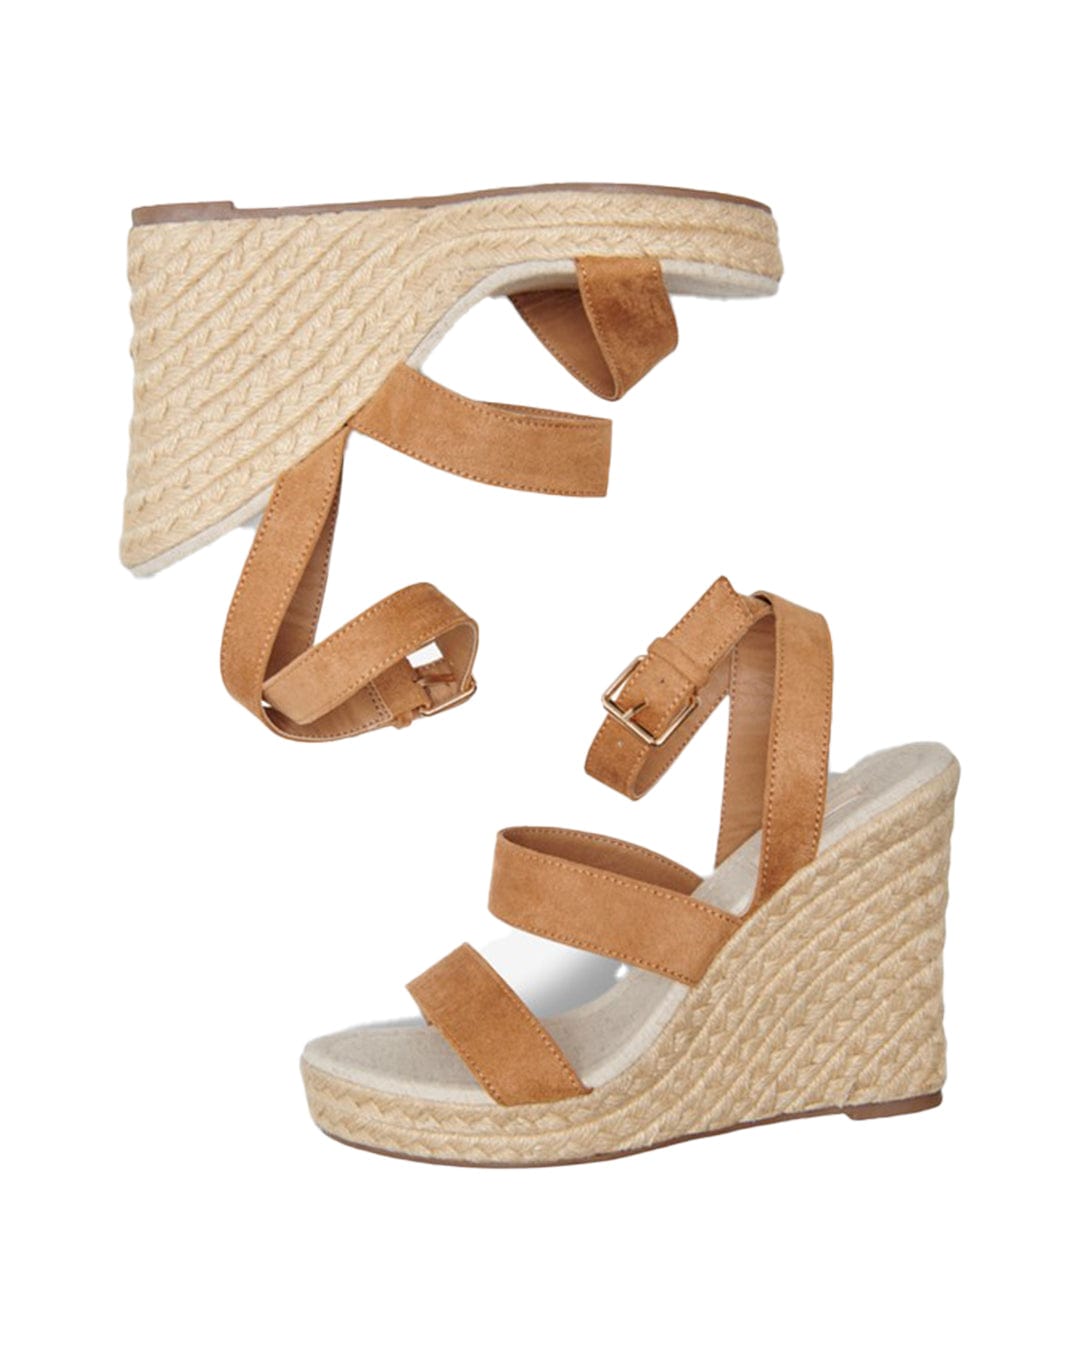 Only Shoes Only Amelia-16 Life Brown Wedge Sandal